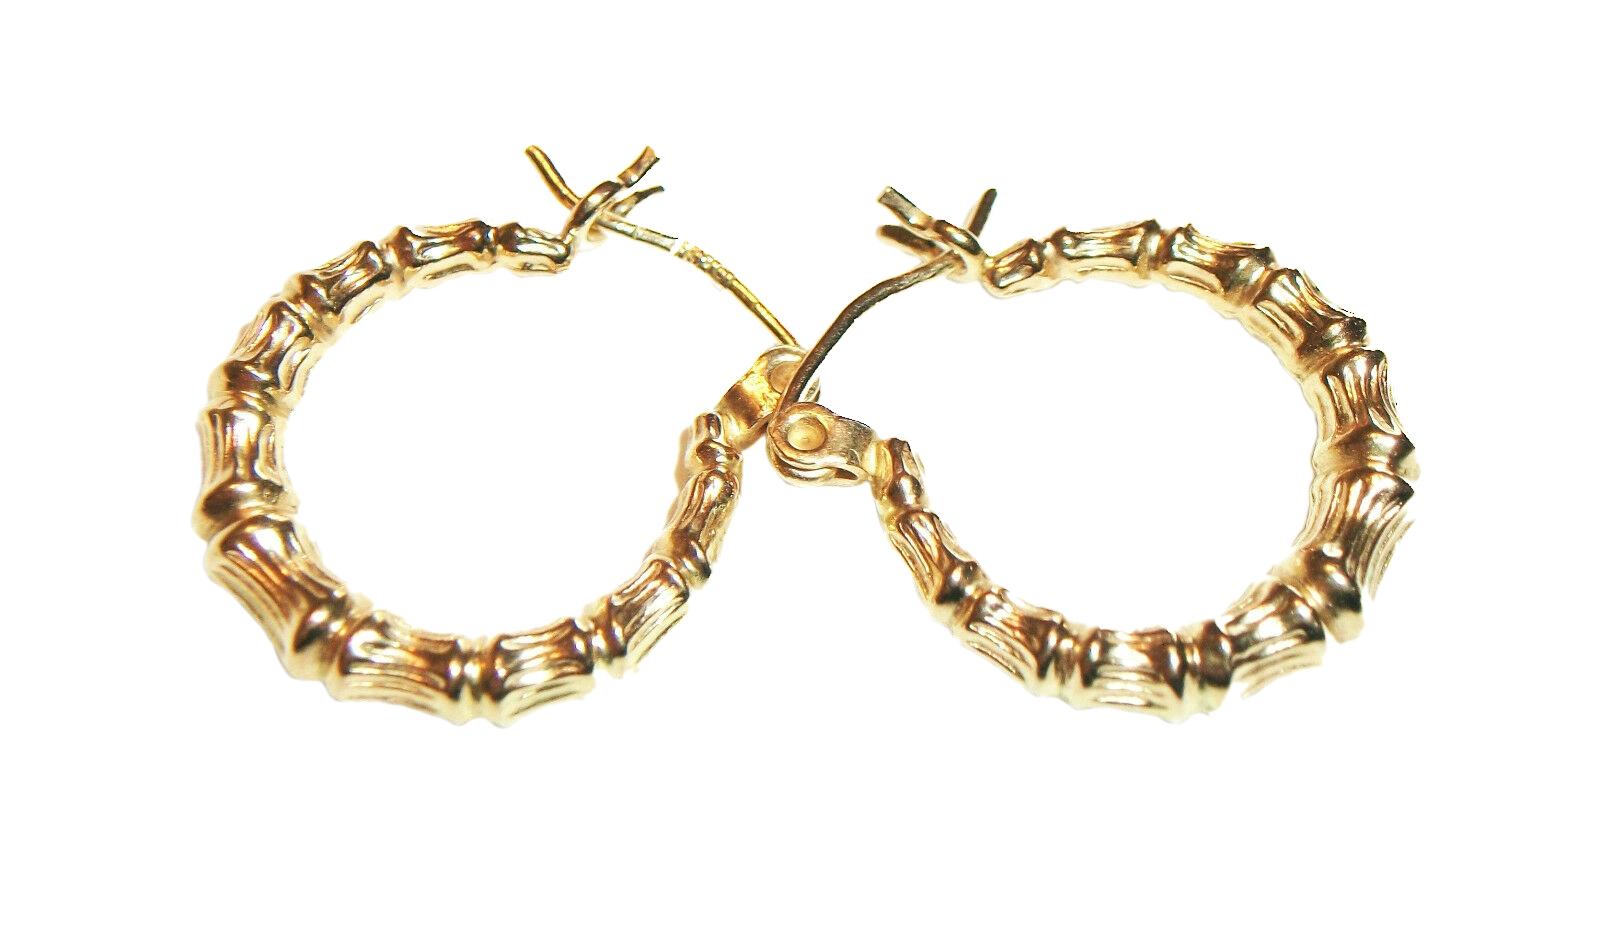 Vintage faux bamboo hoop earrings - 10K yellow gold - hallmarked - late 20th century.

Excellent condition - all original - no loss - no damage - no repairs - minor signs of age and use - ready to wear.

Size - 3/4